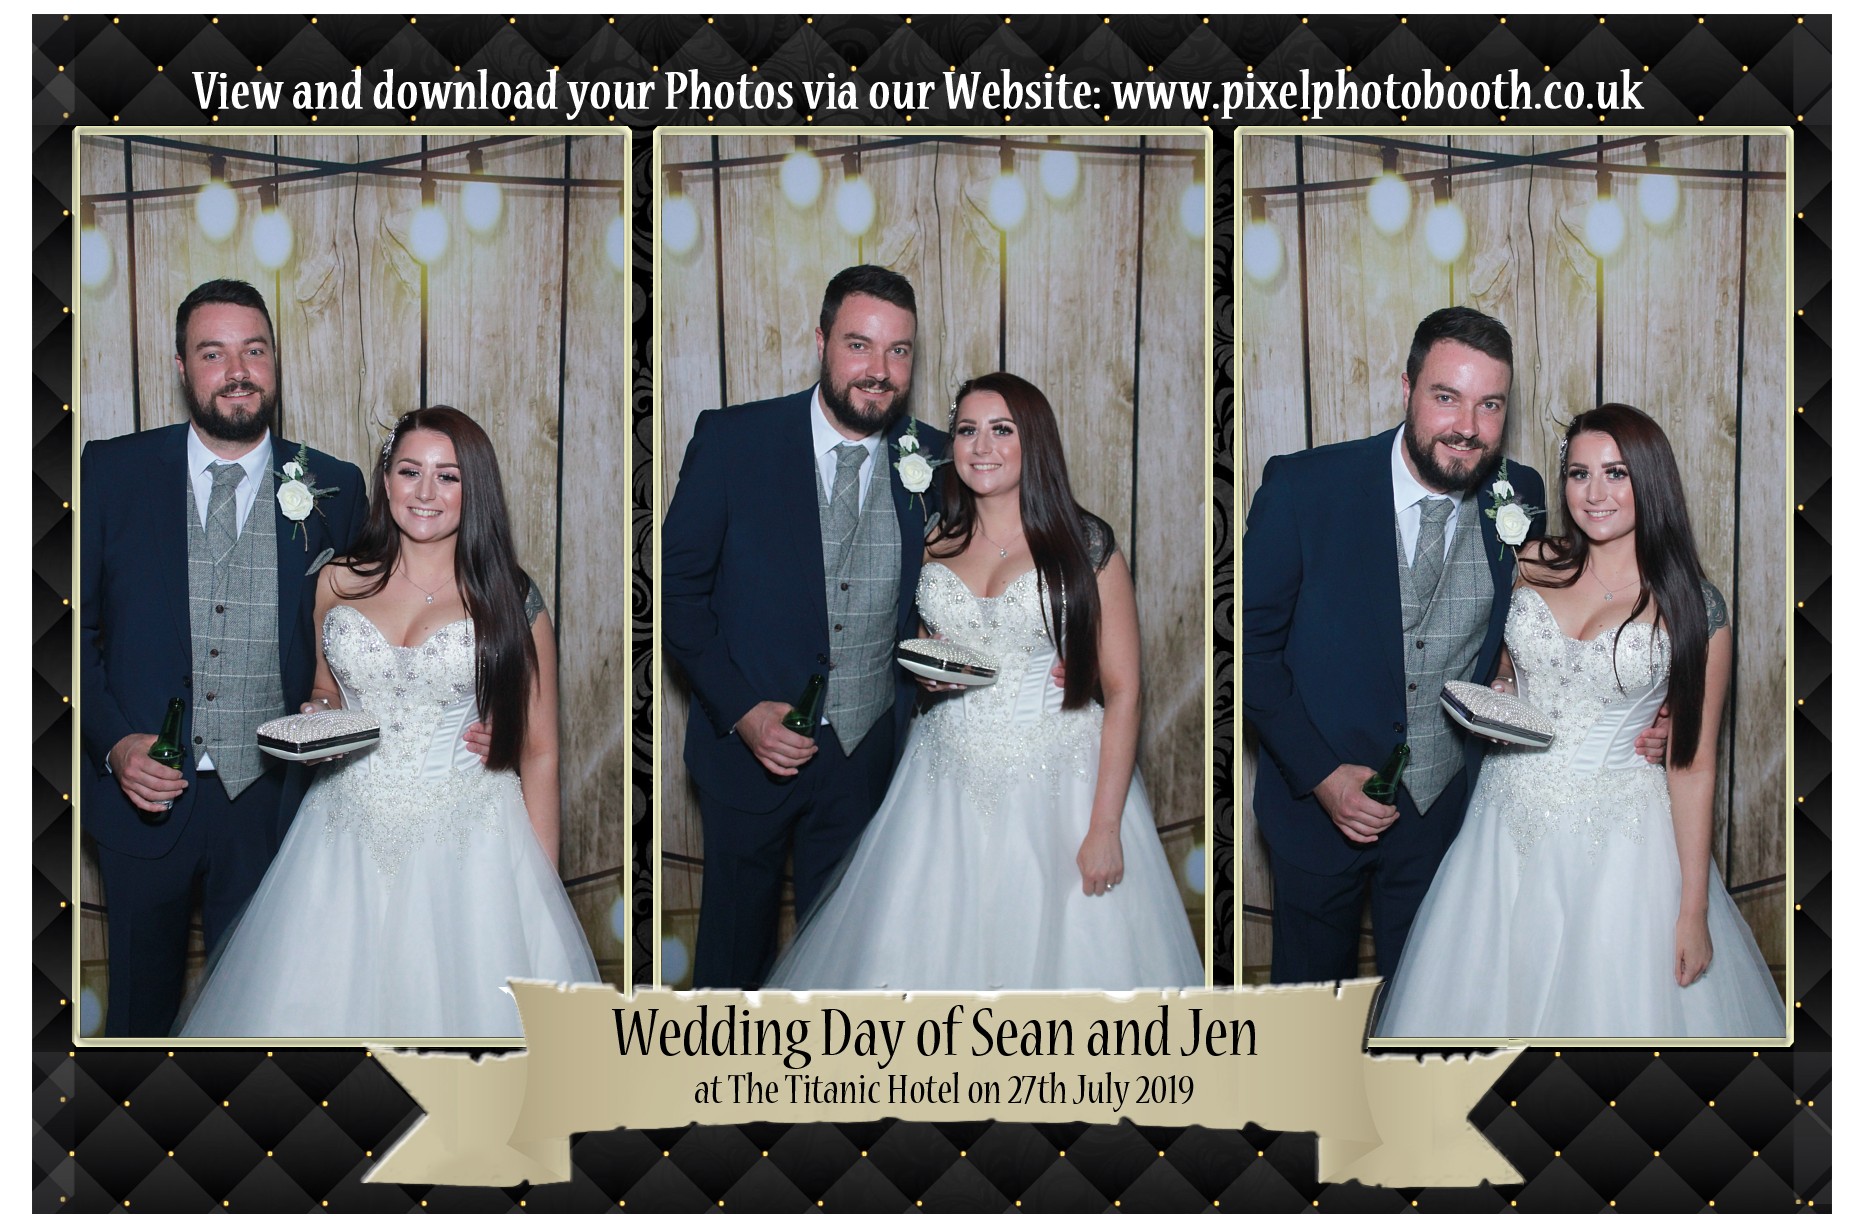 27th July 2019: Sean and Jen's Wedding at the titanic Hotel